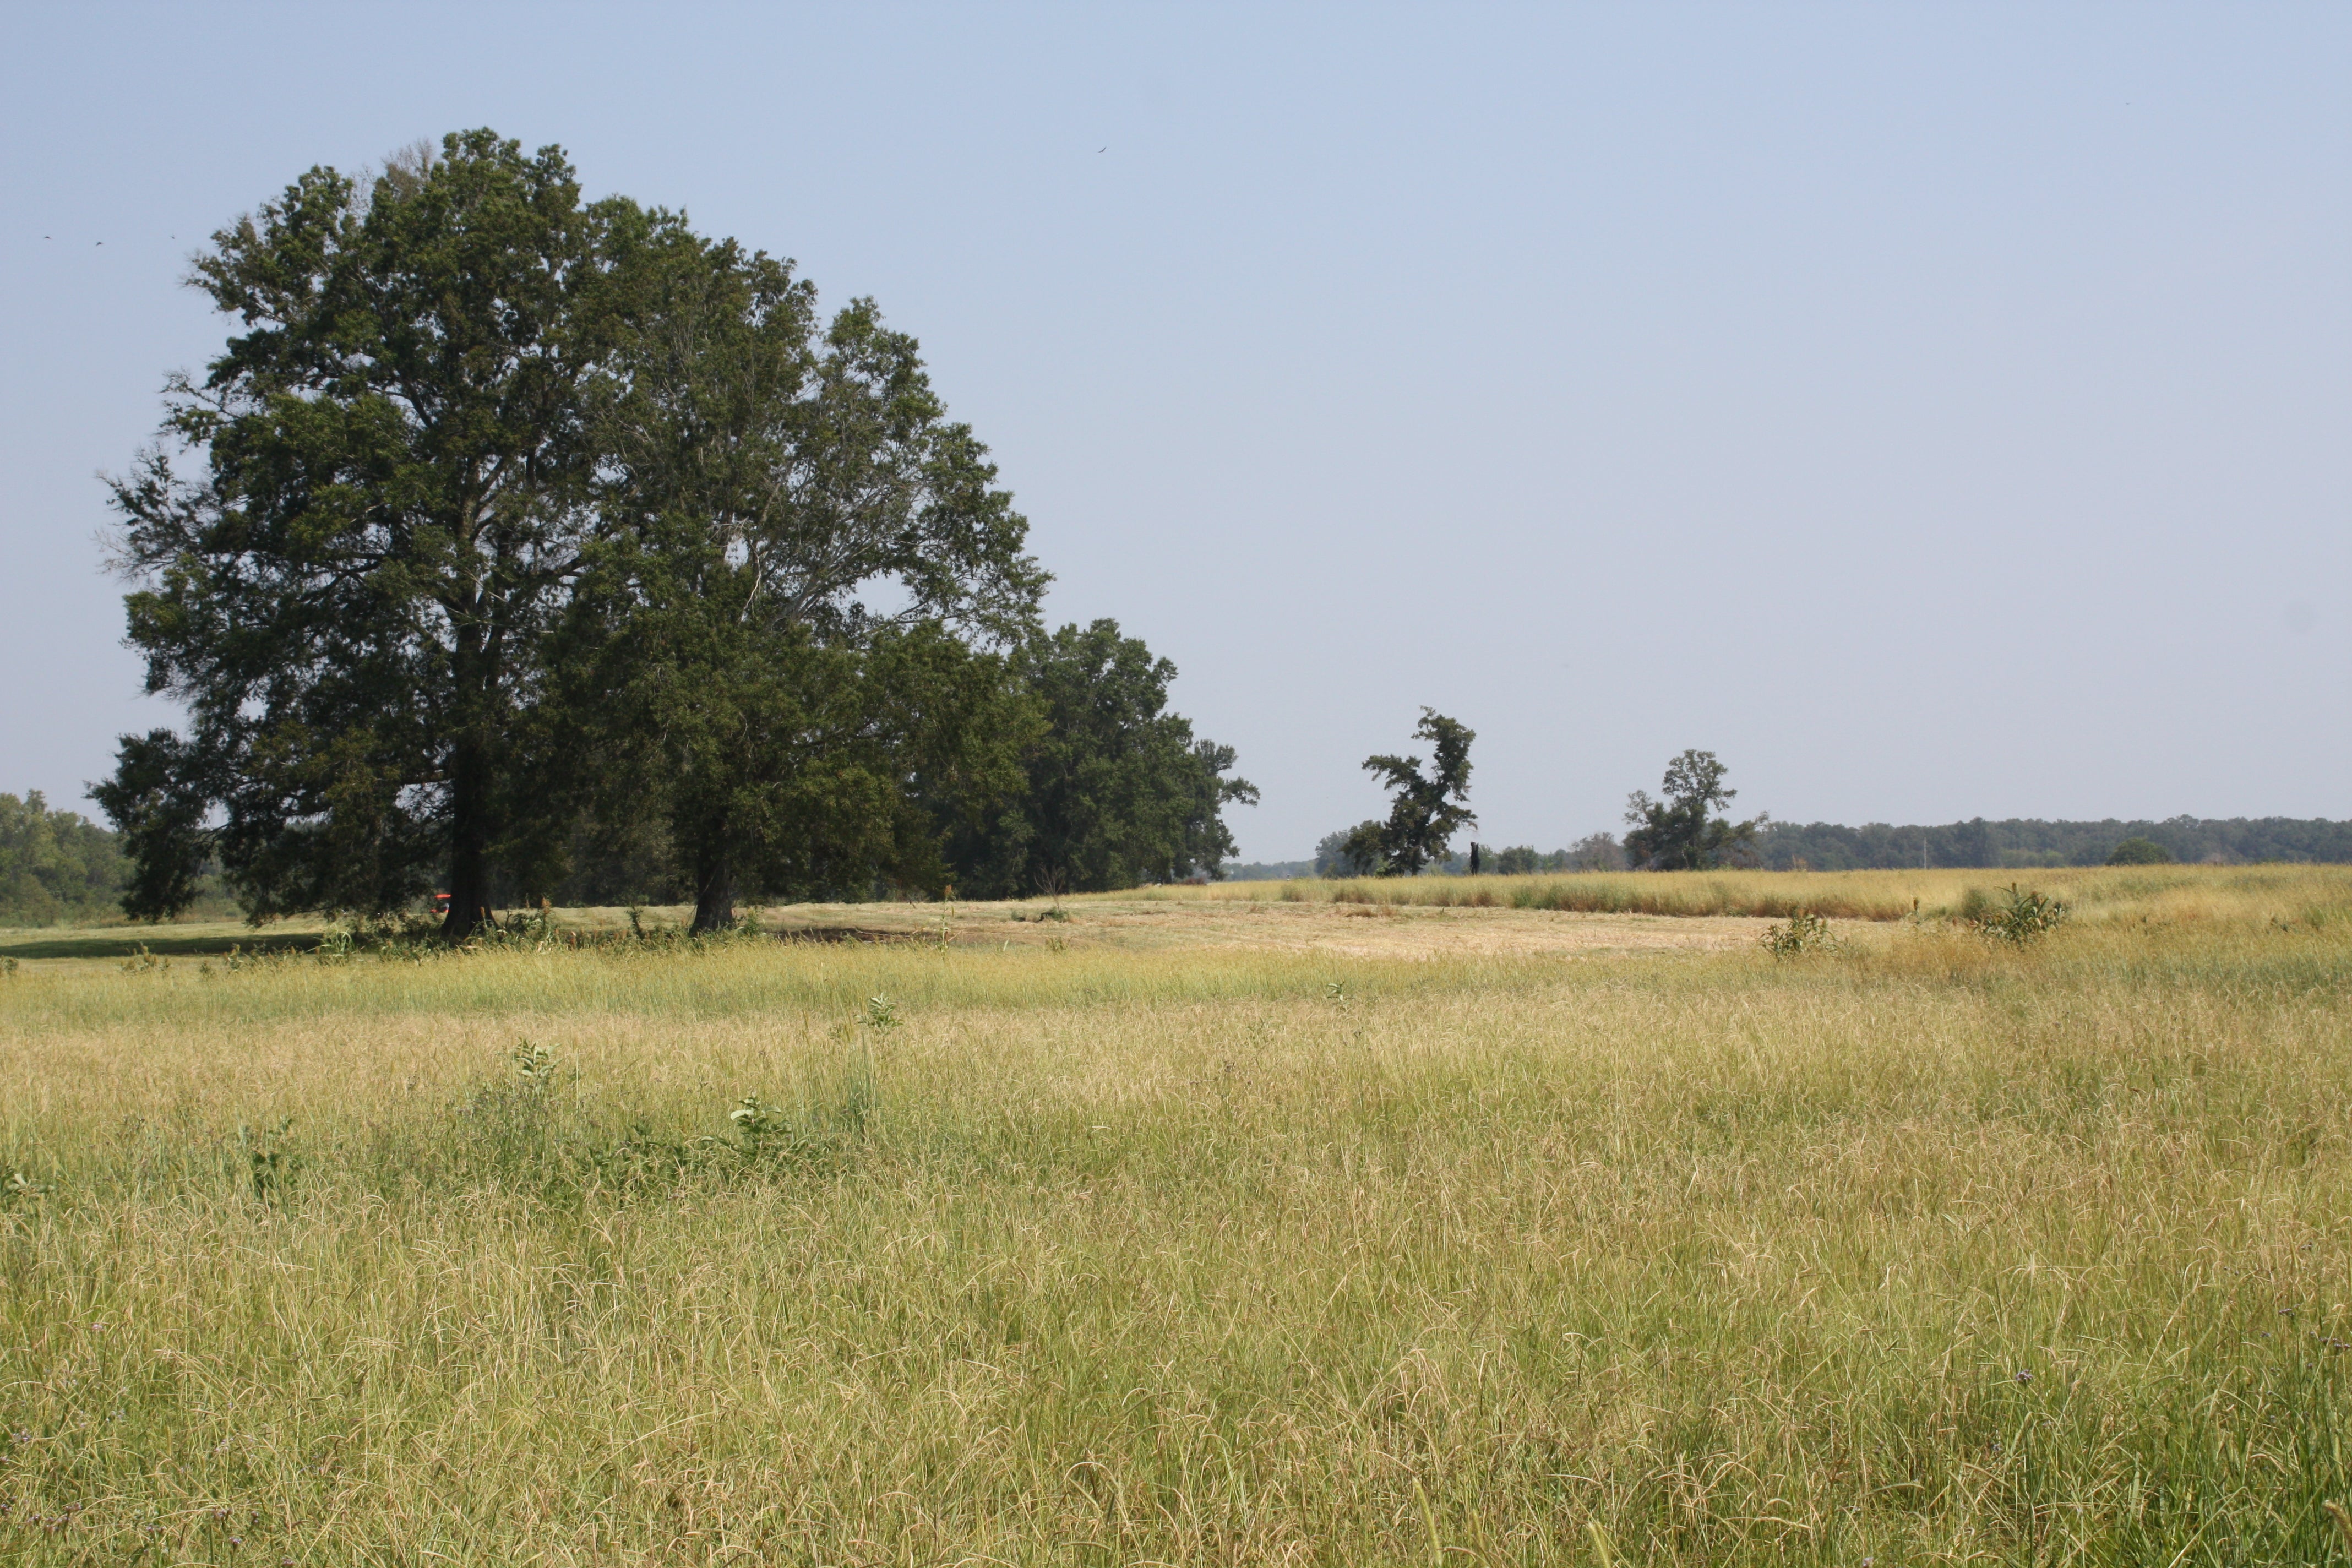 The M. Barnett Lawley Forever Wild Field Trial Area consists of 4,300 acres in Hale County and is managed as a nature preserve and recreation area.